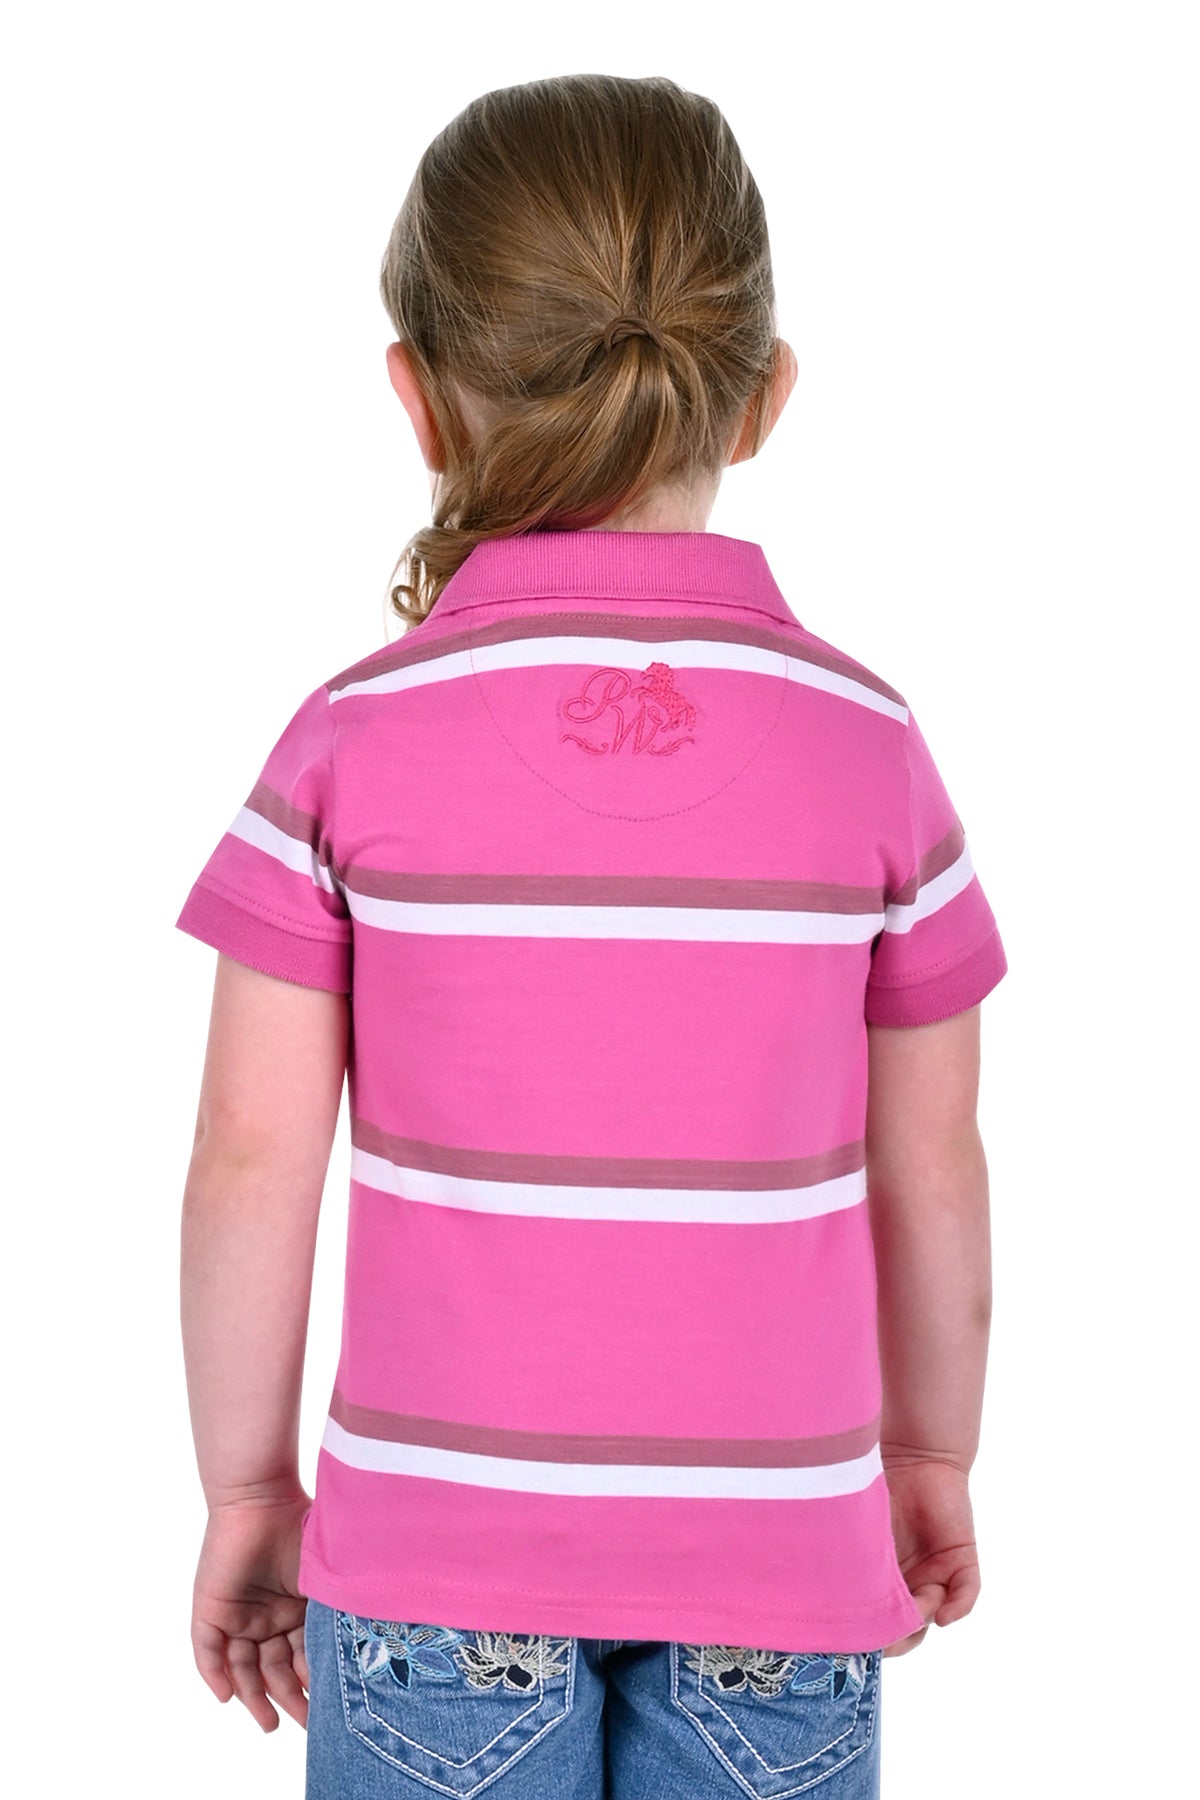 Pure Western Girls Emerie Polo - Pink/White